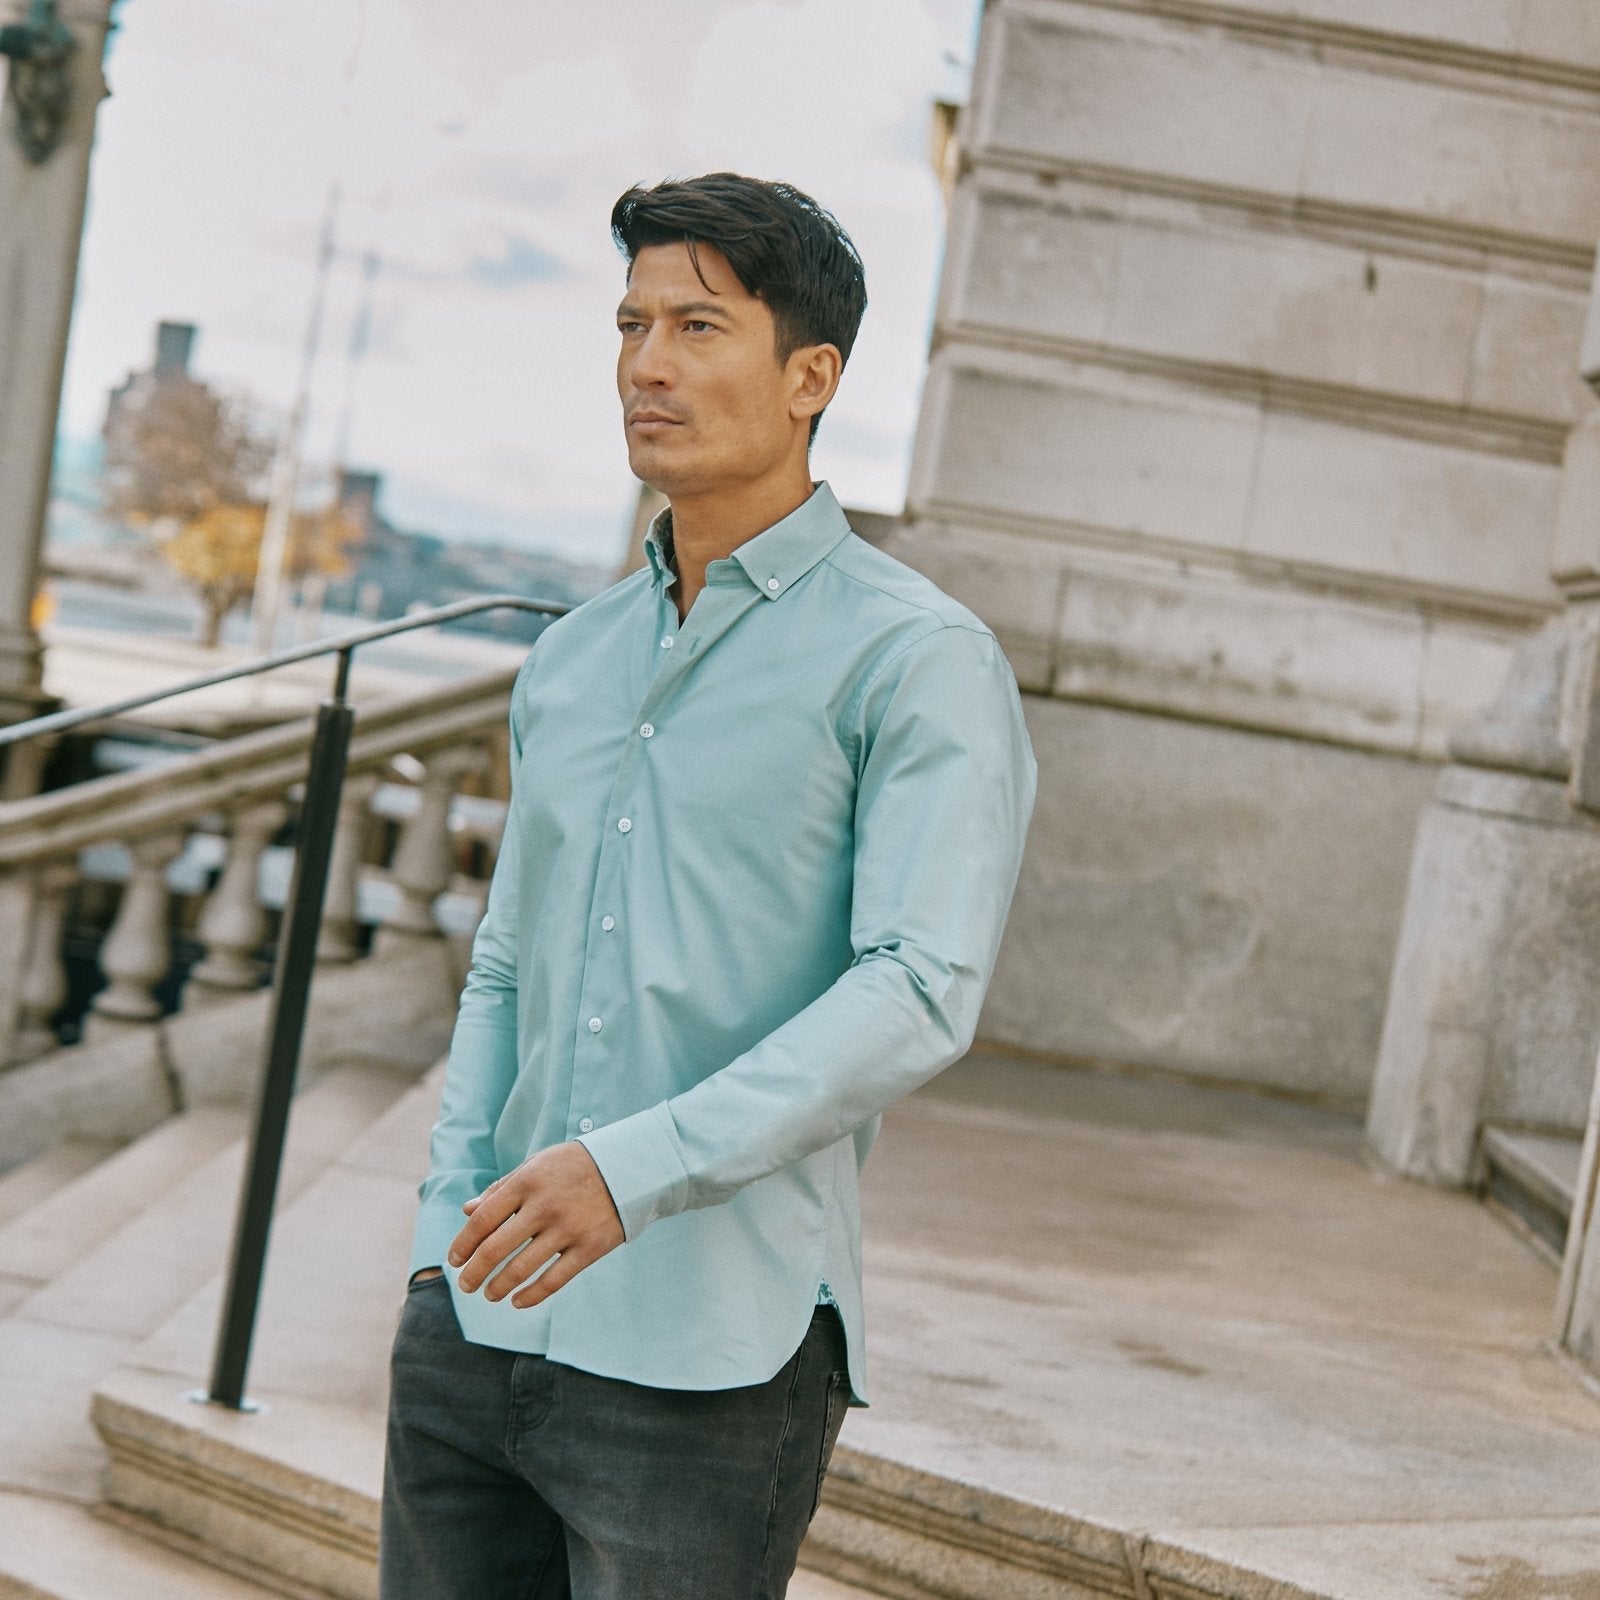 Teal Oxford with Stoned Skulls Accents Button - Down Shirt - Blake Mill